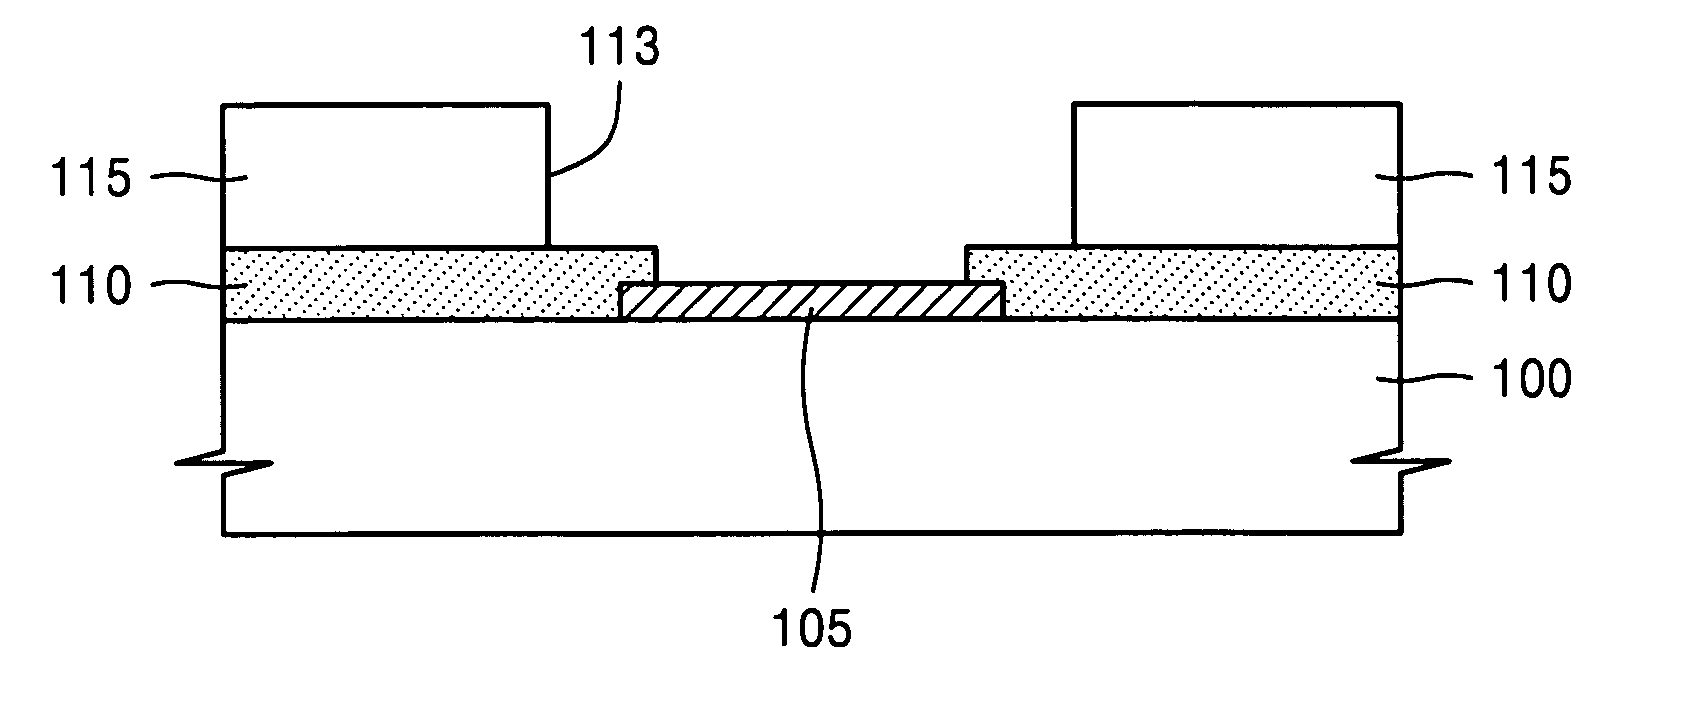 Method of forming solder bump with reduced surface defects